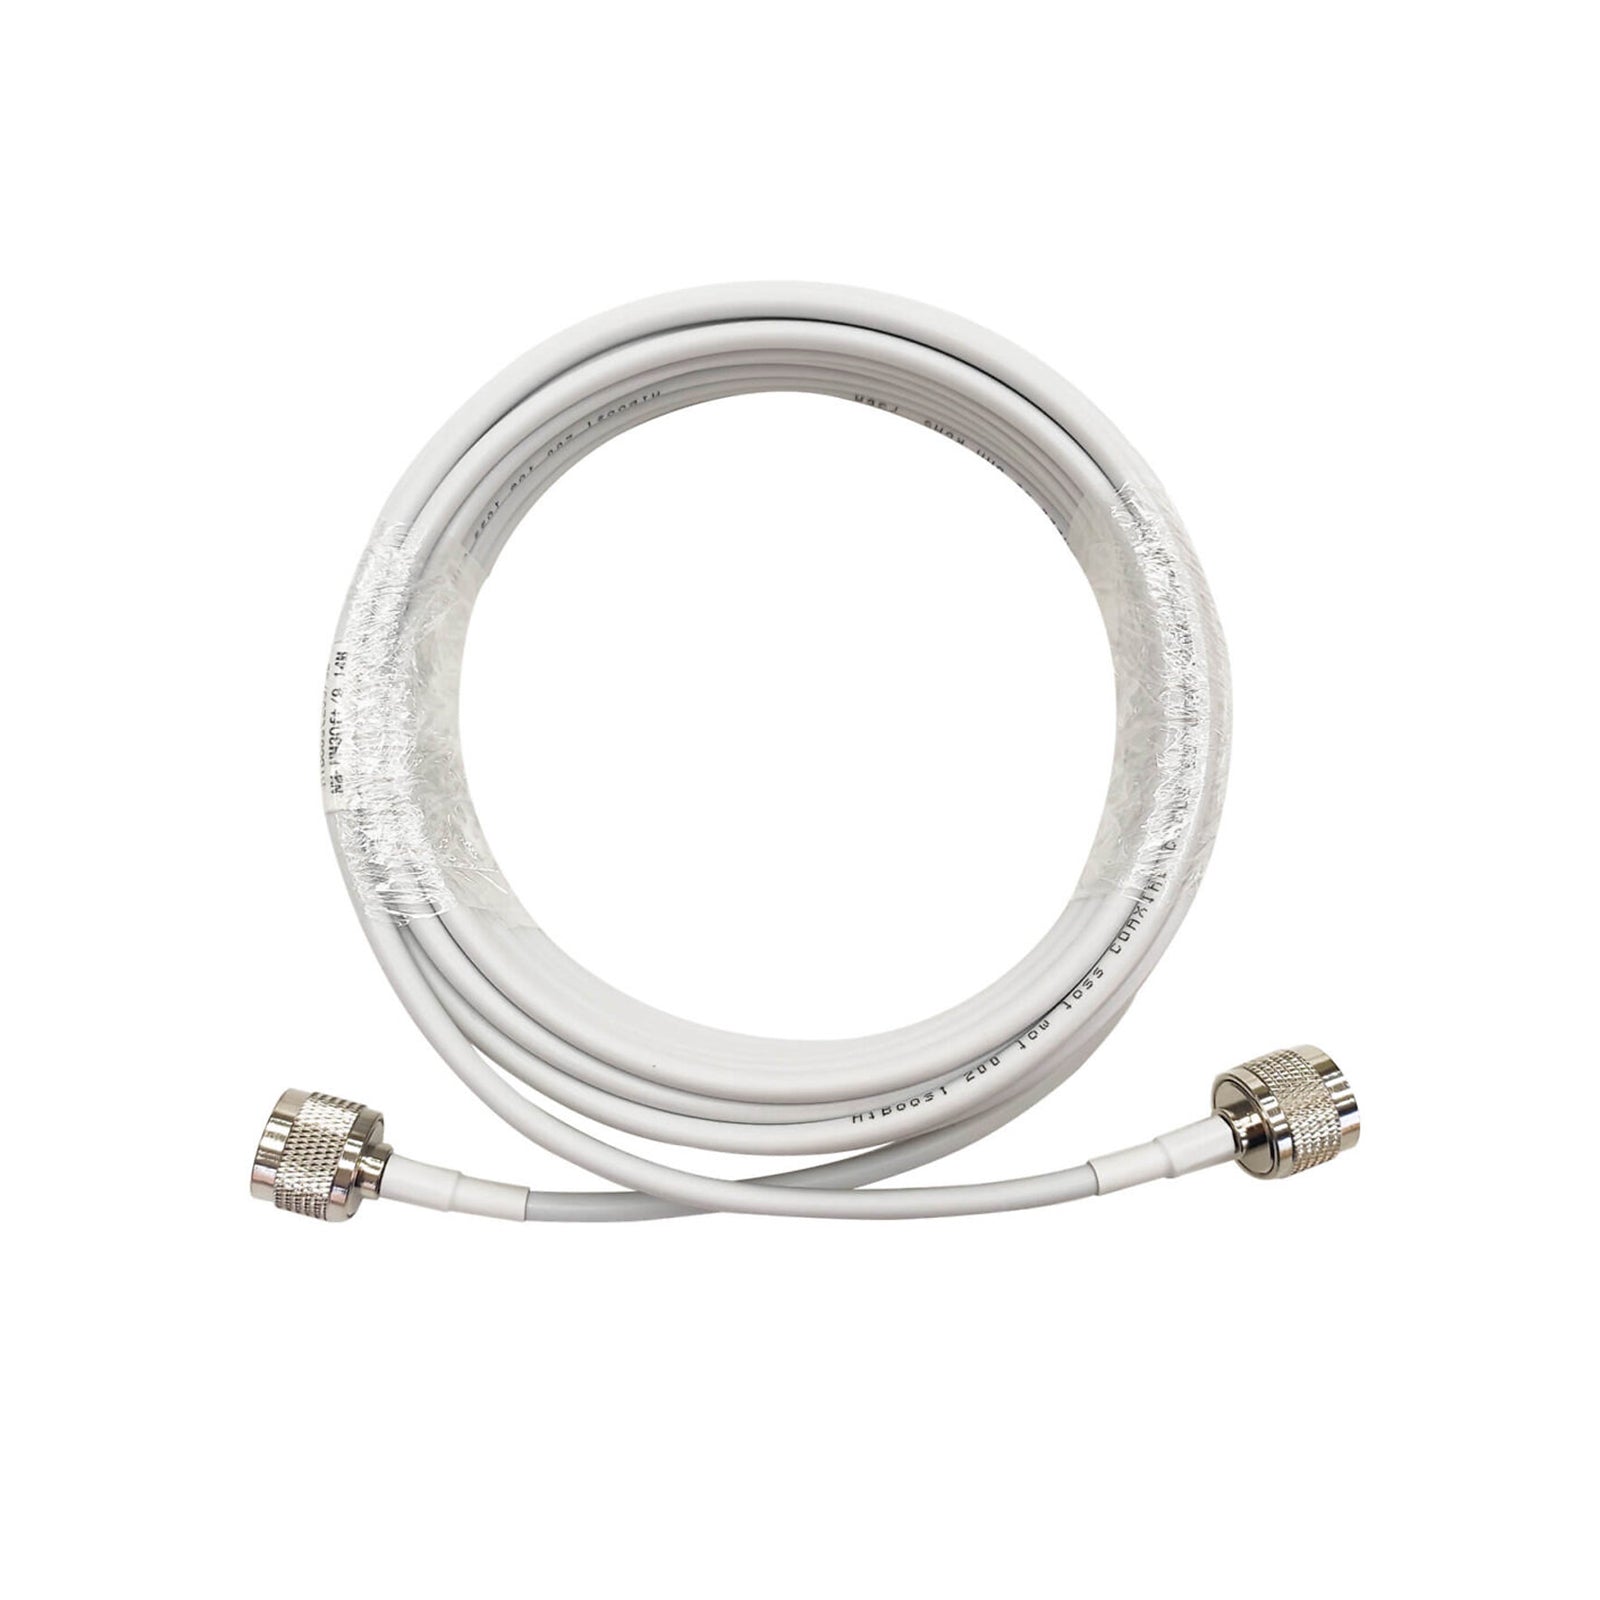 HiBoost 30ft Low-loss 200 Coaxial Cable